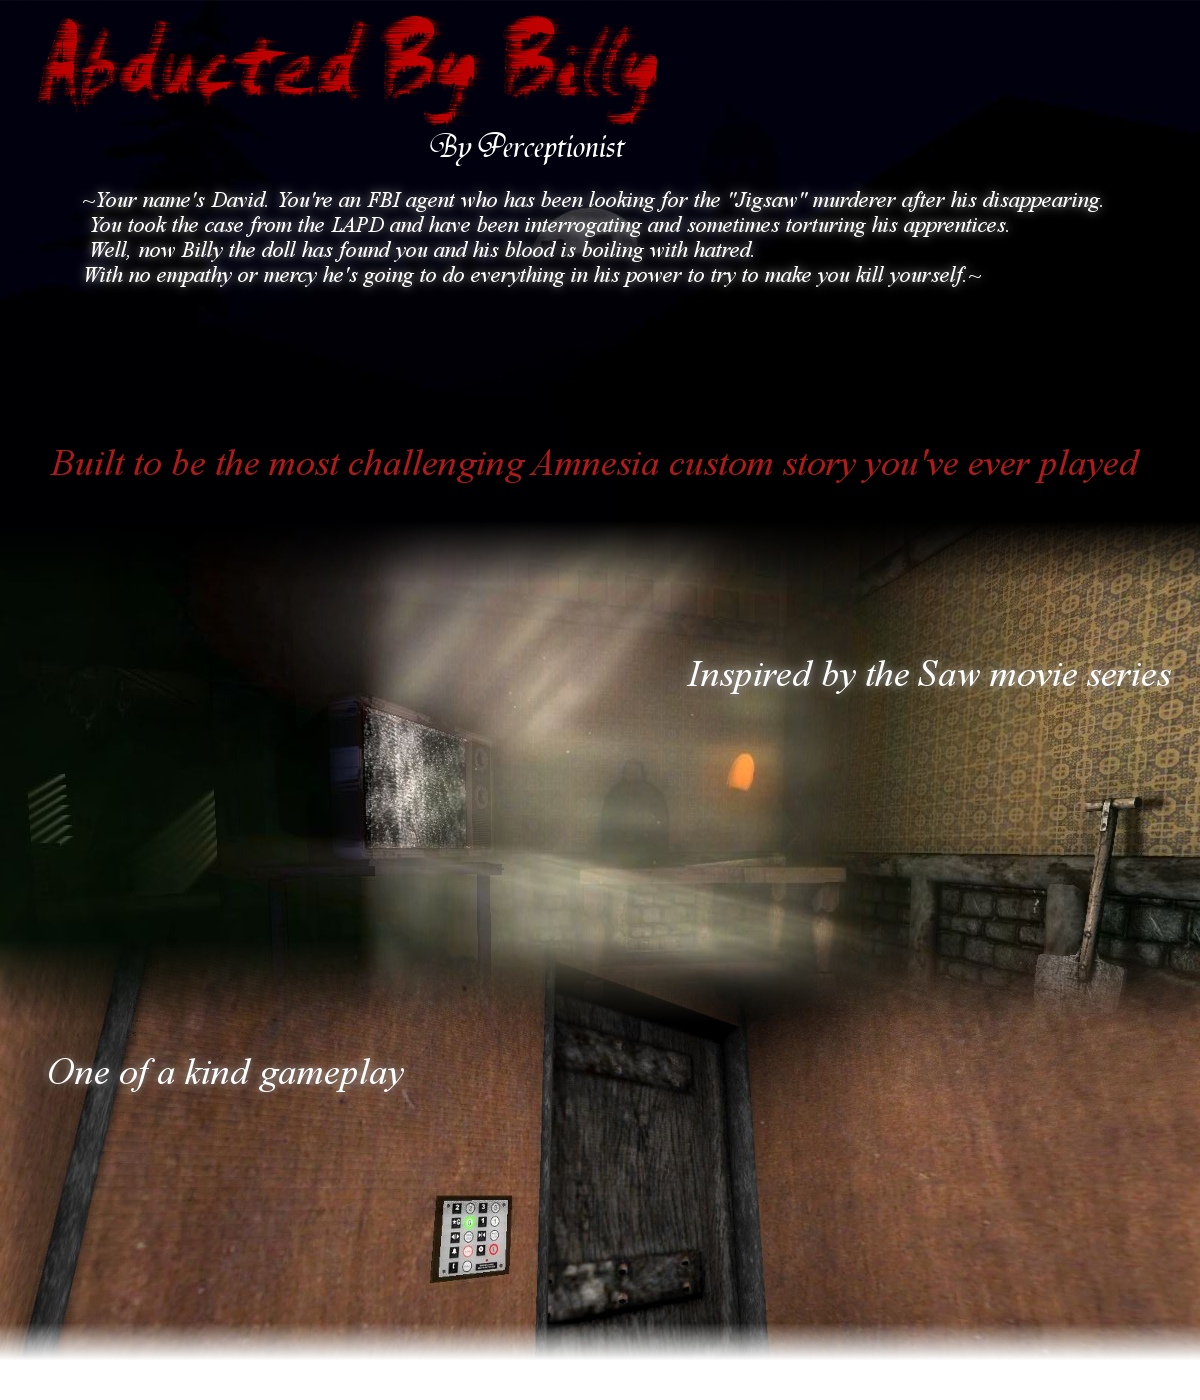 Abducted by Billy (Challenge Mod) for Amnesia: The Dark Descent - ModDB